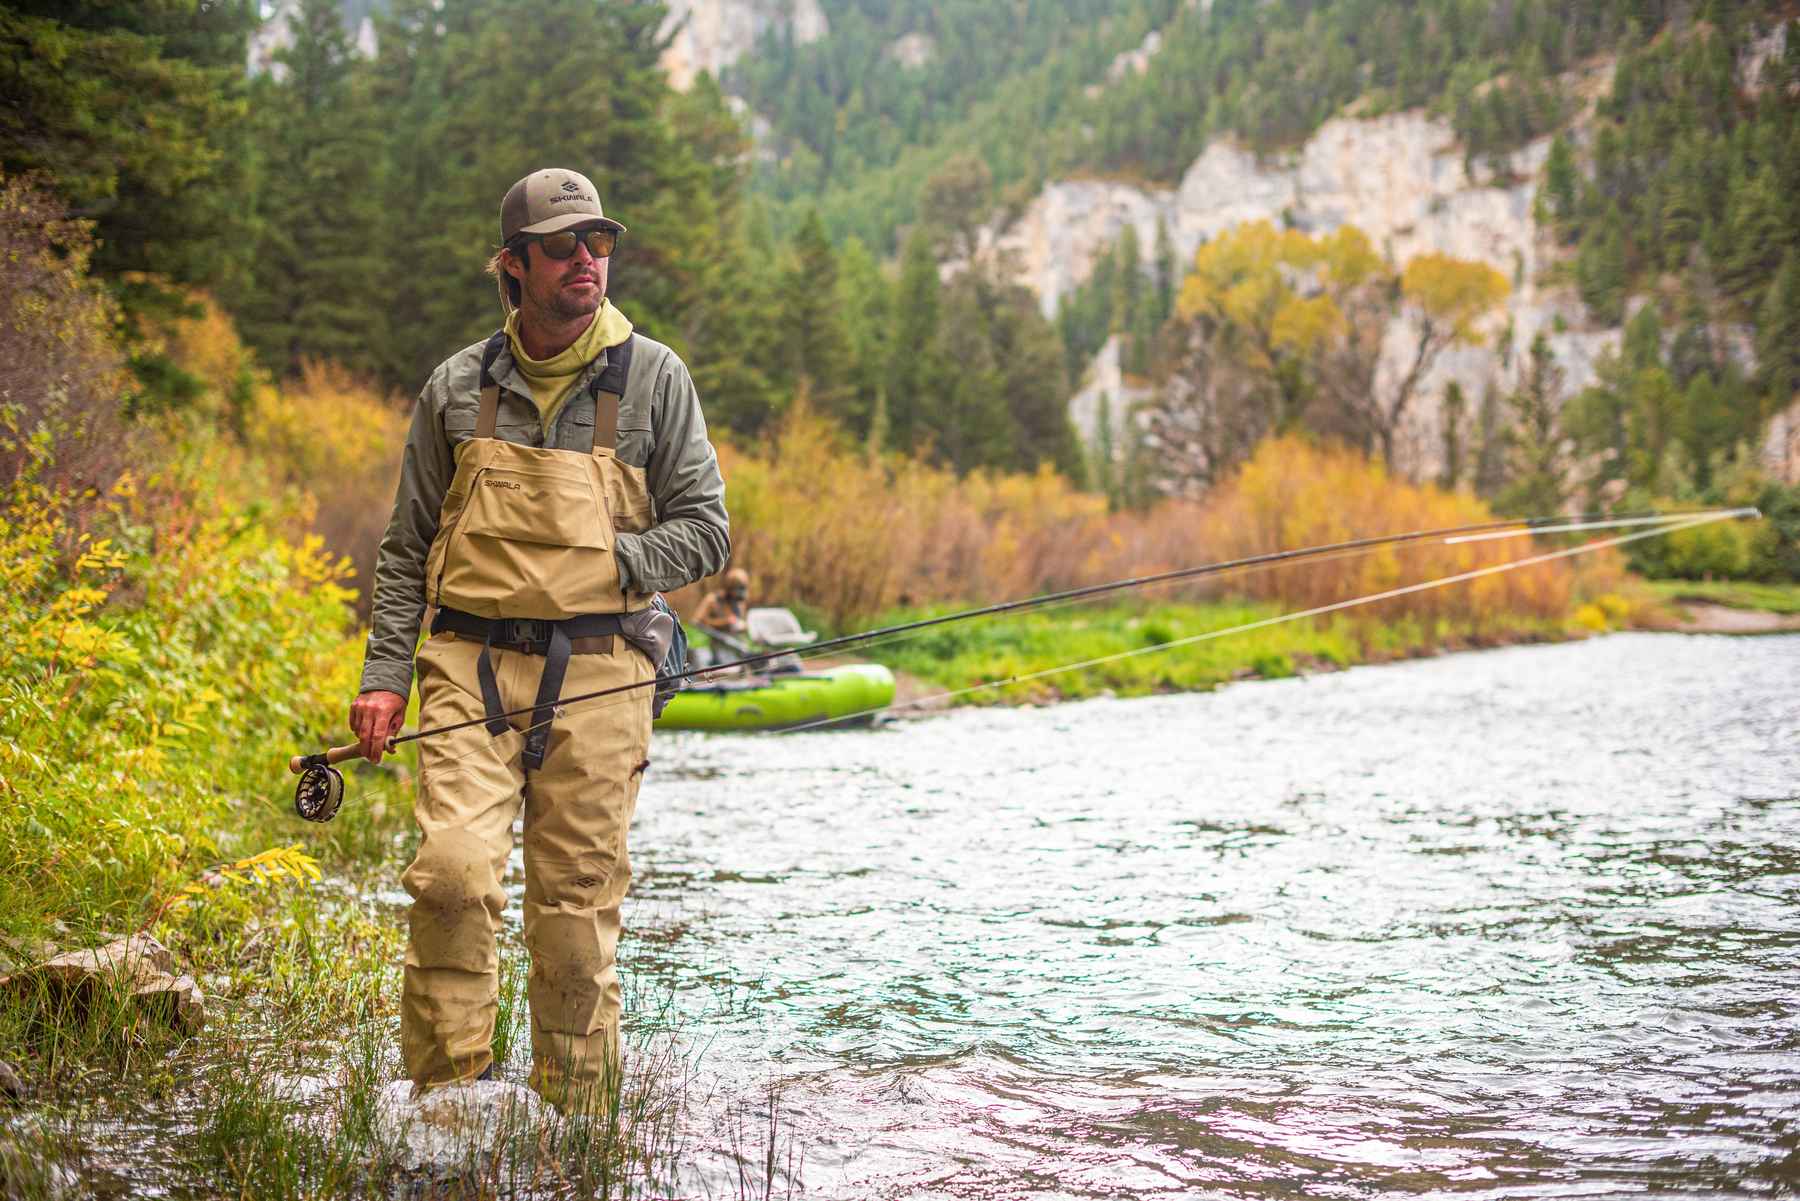 Orvis: Quality Clothing, Fly-Fishing Gear & More Since 1856